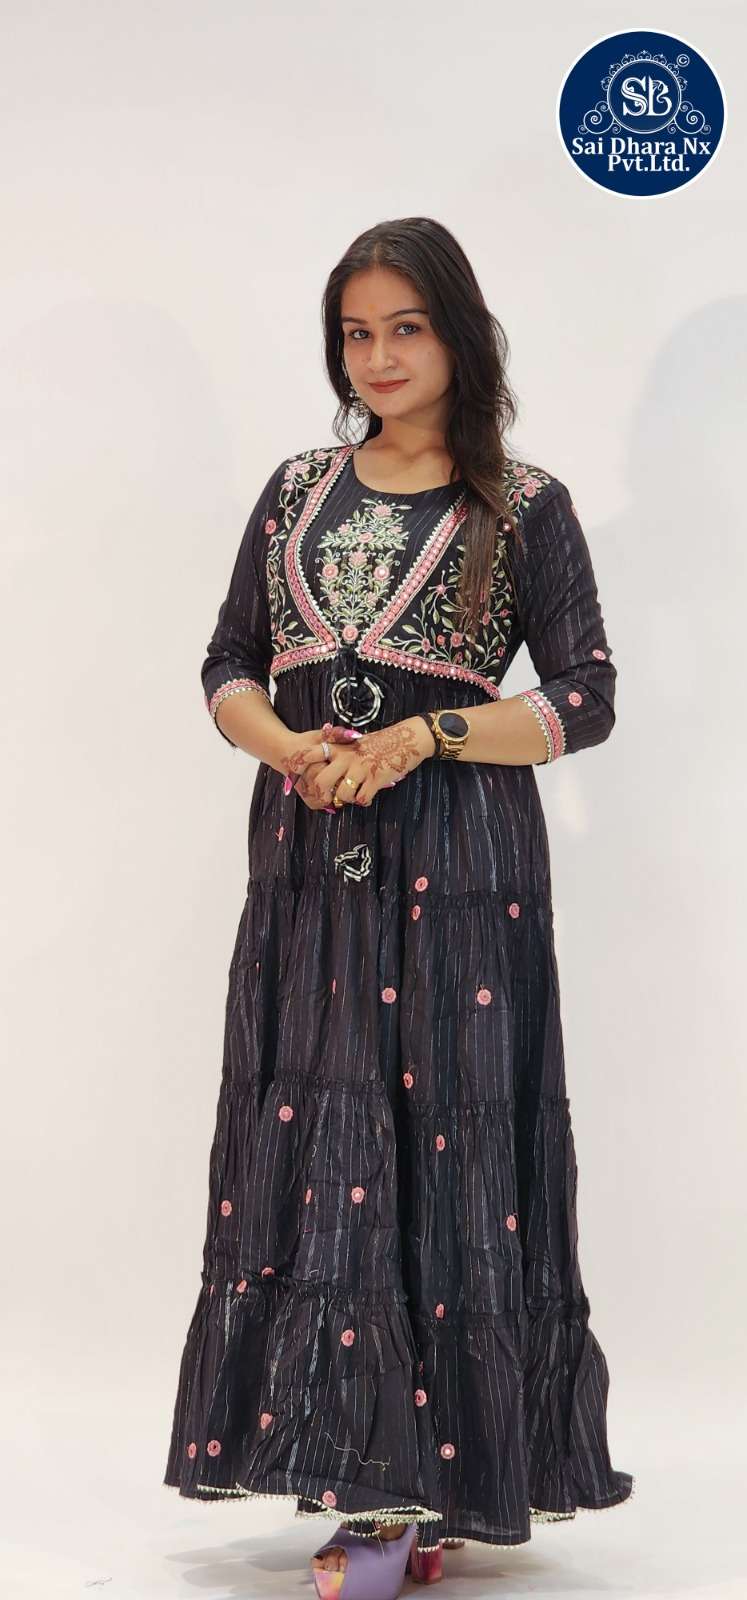 SAIDHARANX PRESENTS PURE COTTON LATEST DESIGN PRINTED BLACK 1 PIECE READYMADE GOWN COLLECTION WHOLESALE SHOP IN SURAT - SaiDharaNx